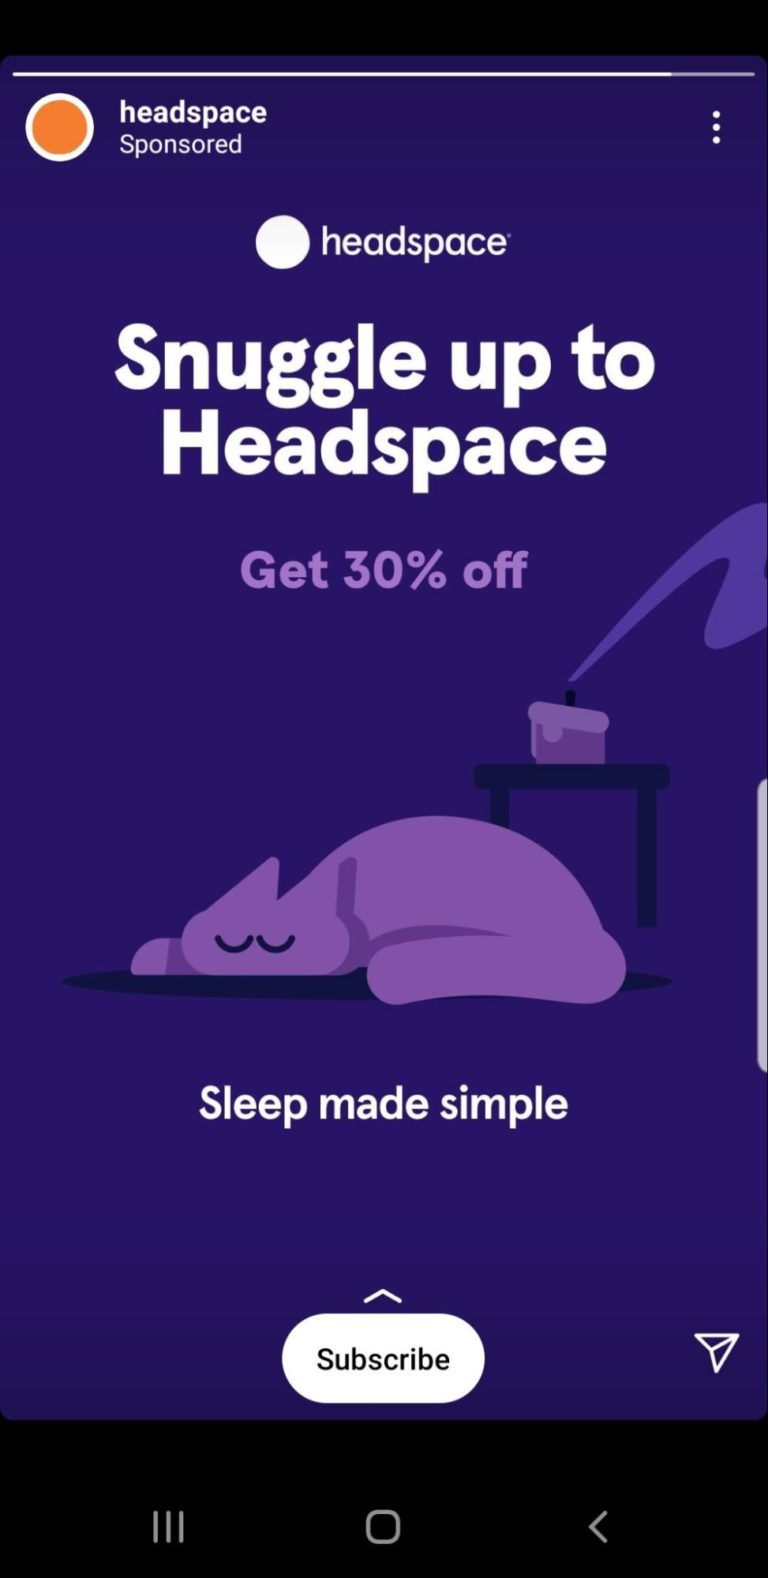 Headspace Call to action Instagram Campaign Ads